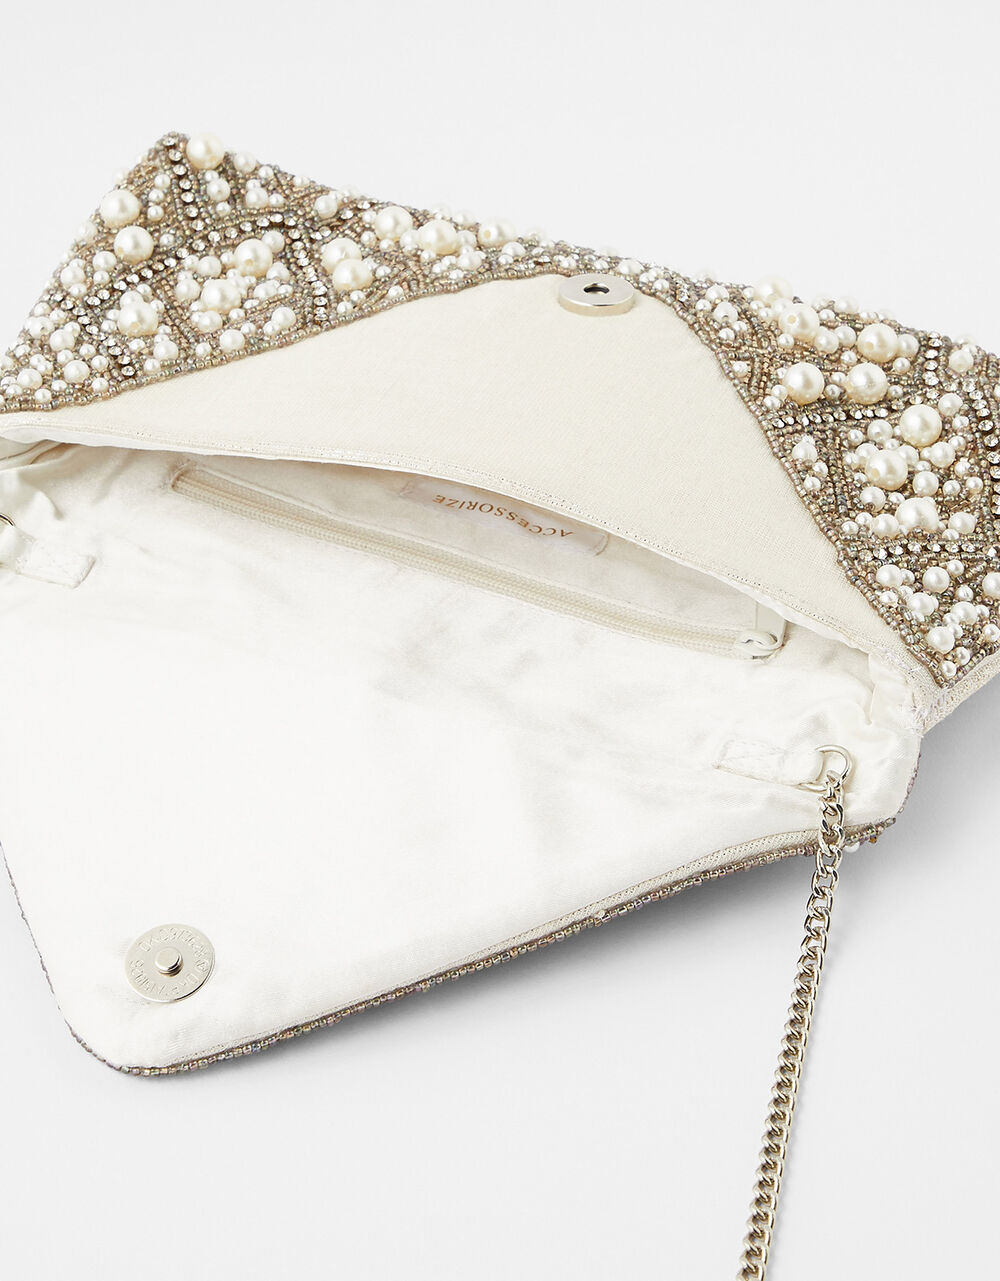 Pearl, Bead and Sequin Envelope Clutch Bag | Clutch bags | Accessorize UK